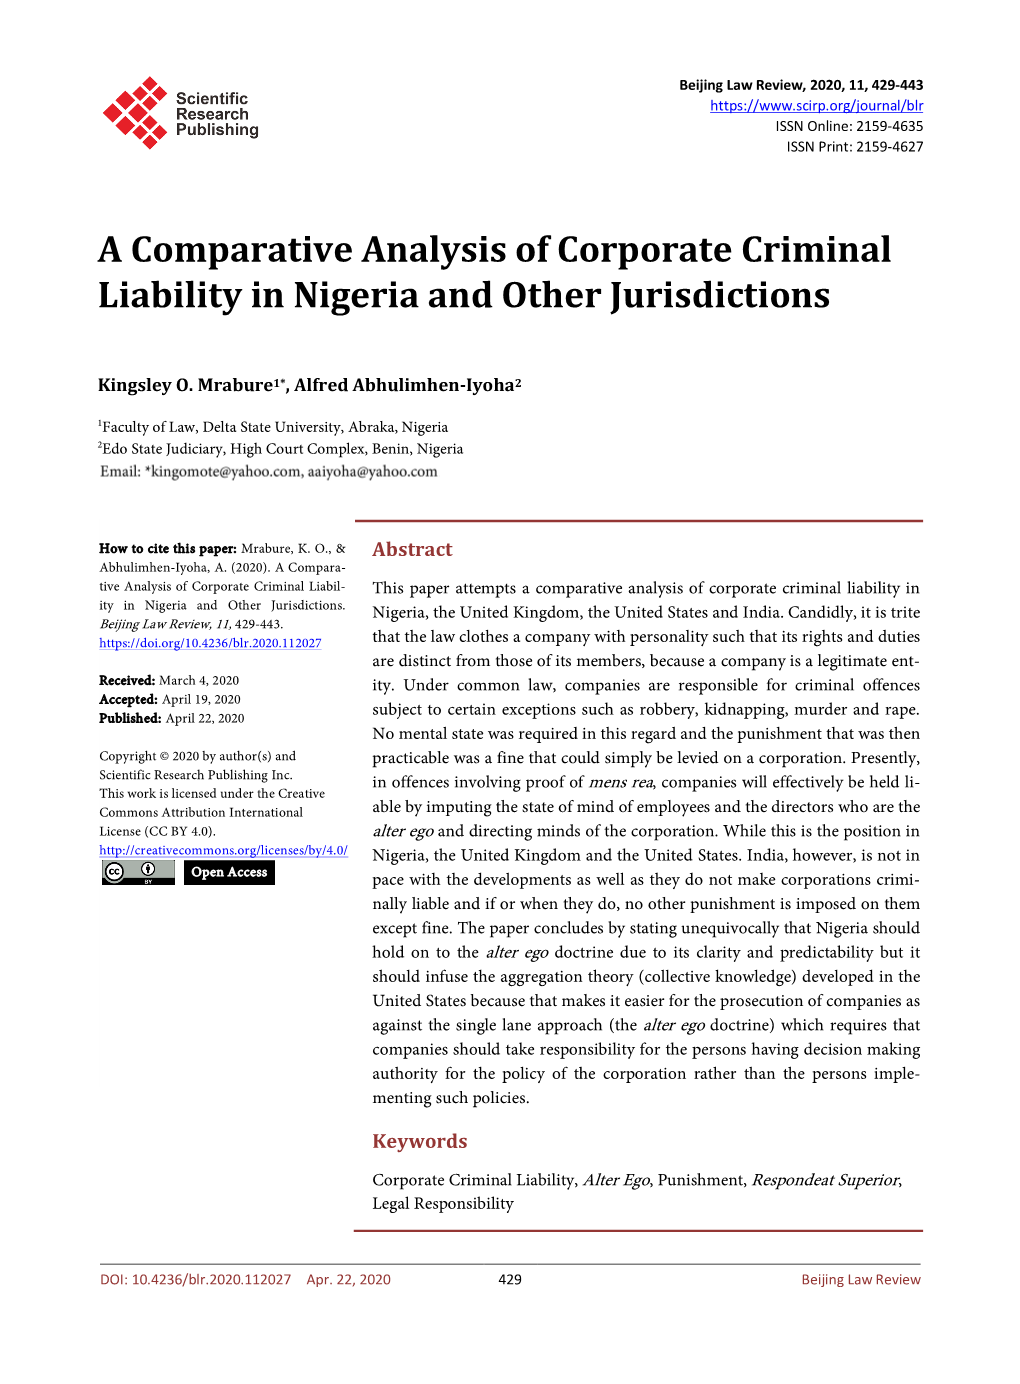 A Comparative Analysis of Corporate Criminal Liability in Nigeria and Other Jurisdictions